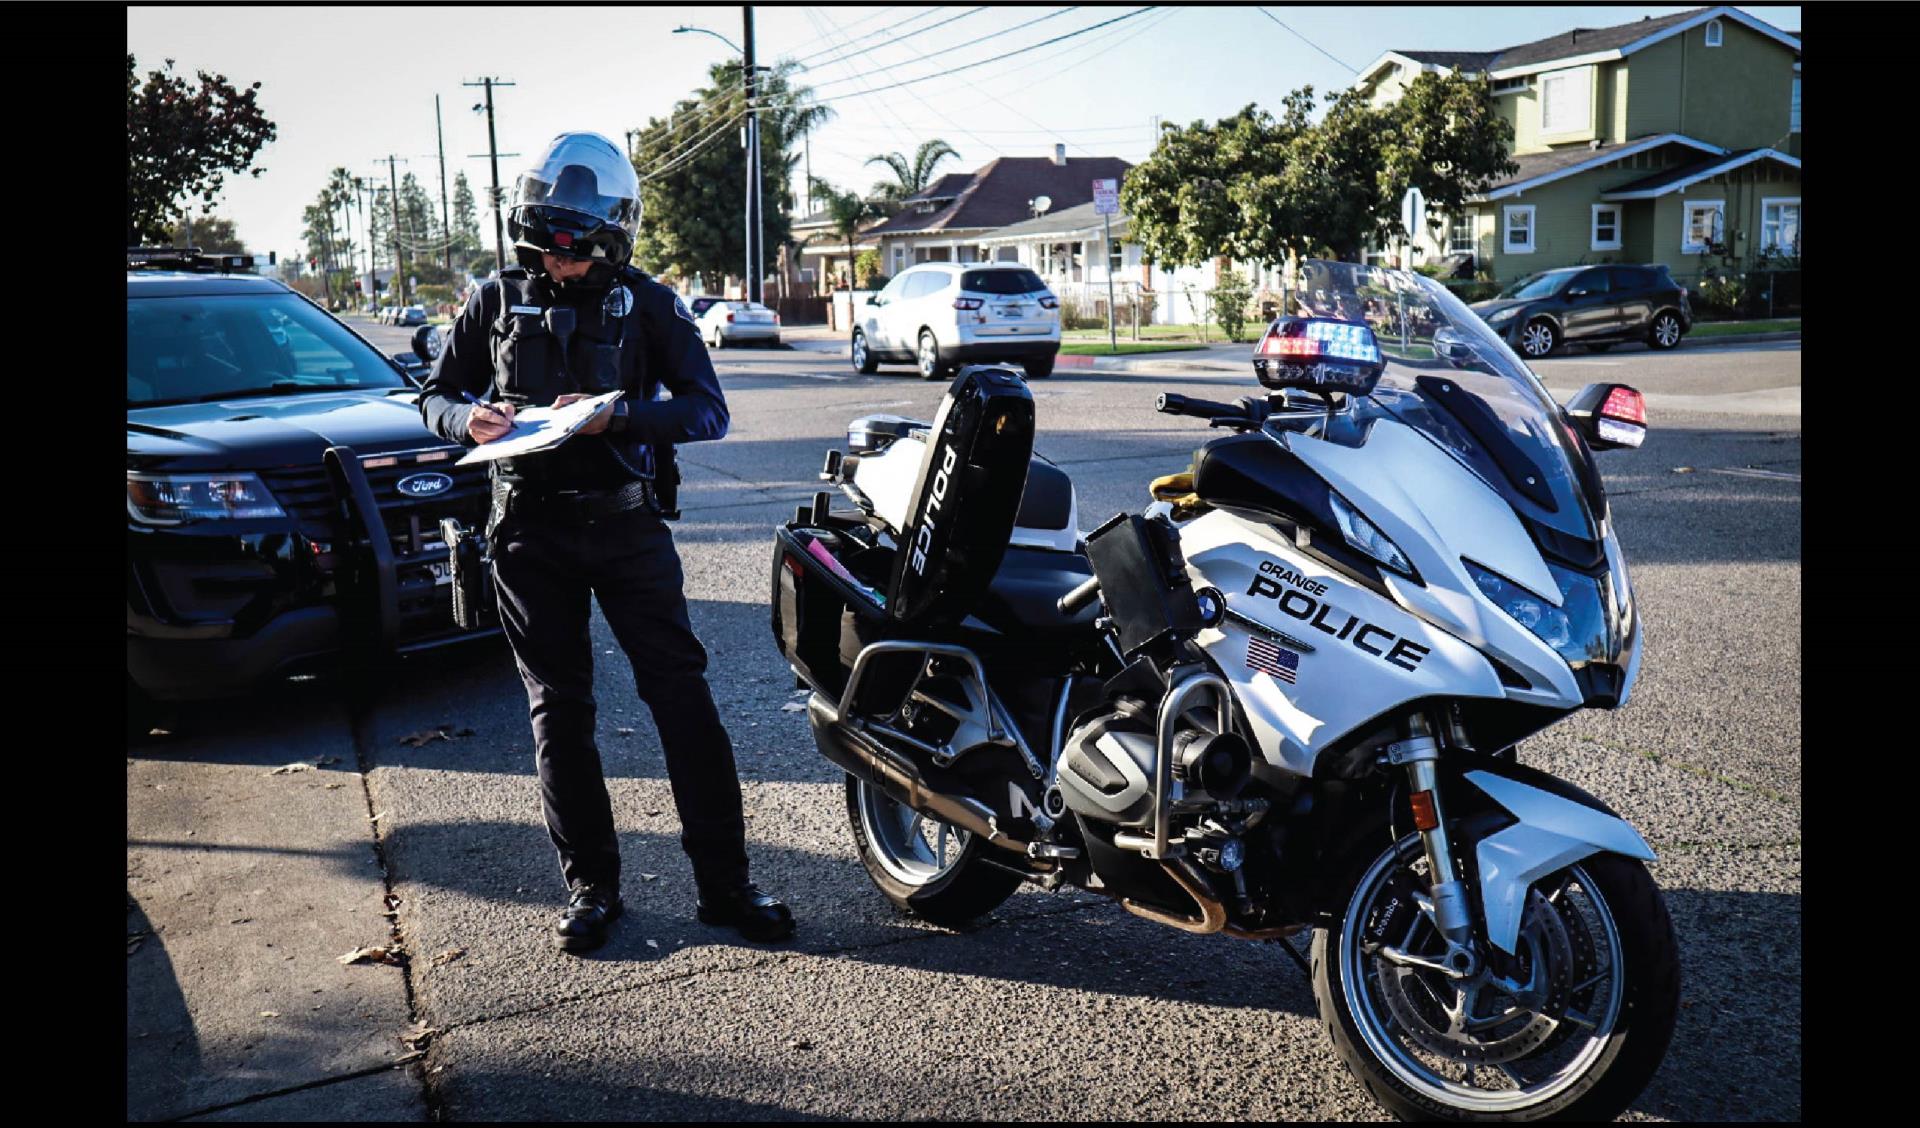 Motorcycle Officer Writing Ticket